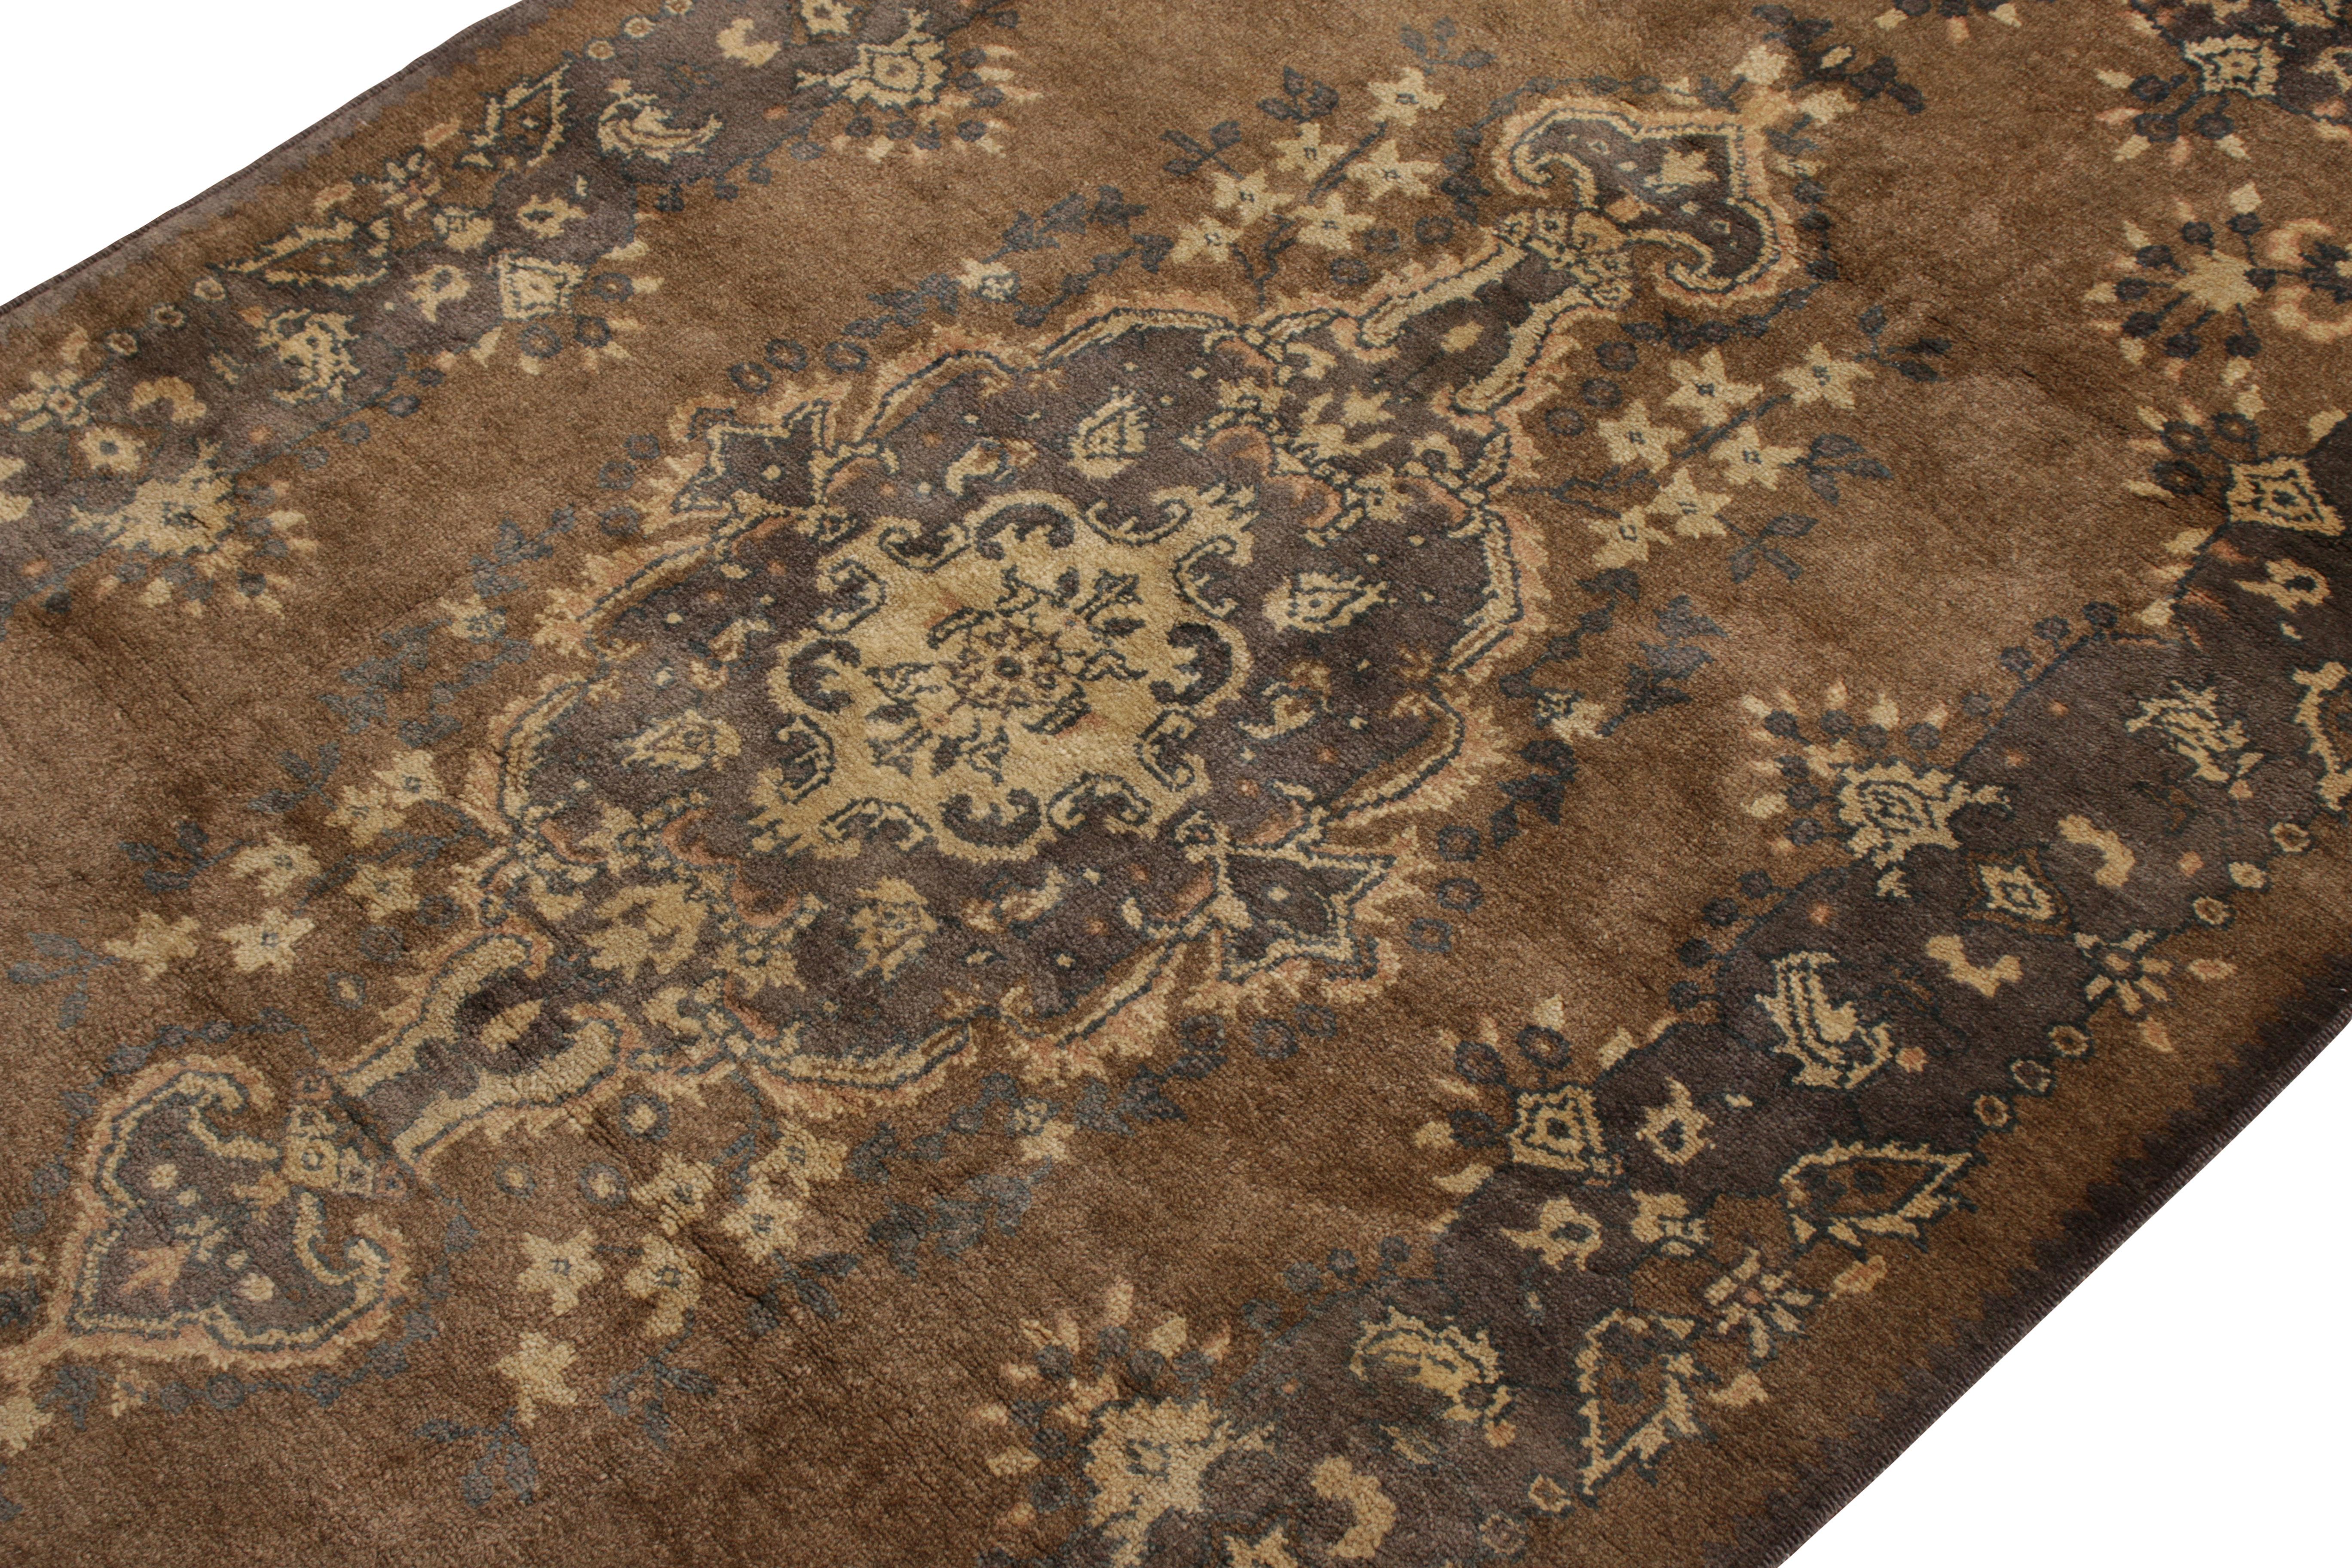 Other Hand-Knotted Vintage Sivas Rug in Beige-Brown with Medallion Floral Pattern